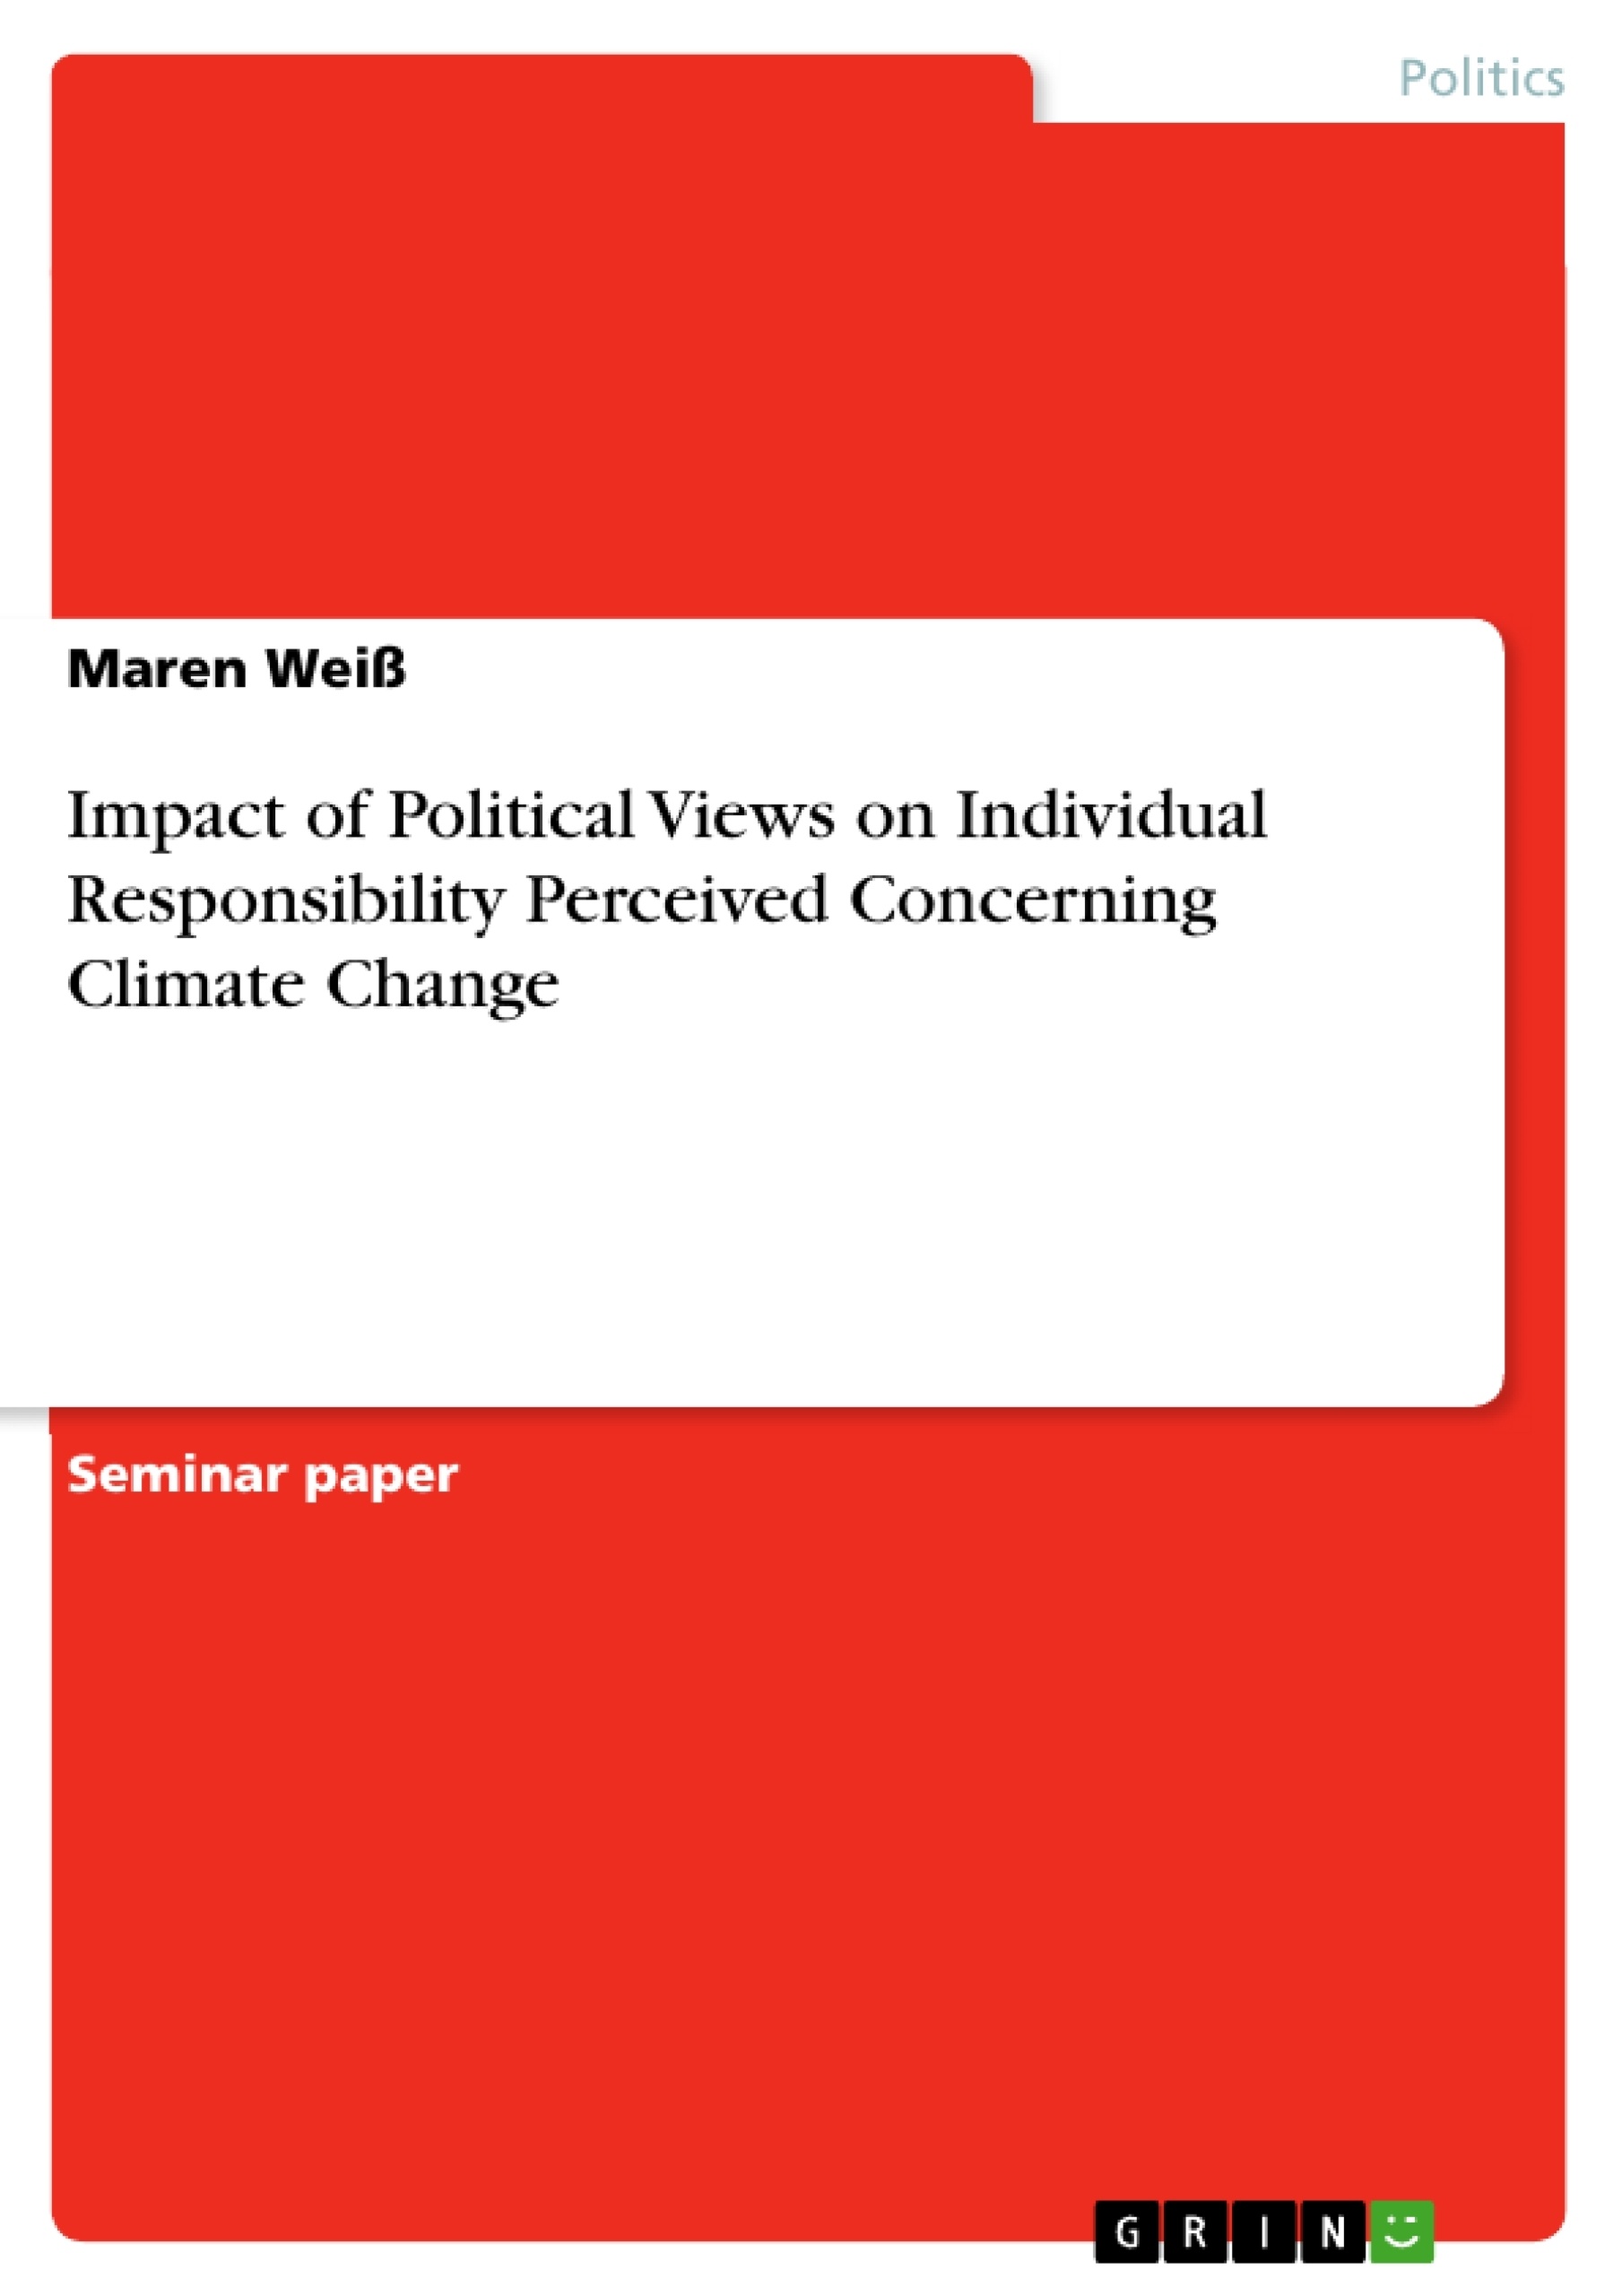 Title: Impact of Political Views on Individual Responsibility Perceived Concerning Climate Change